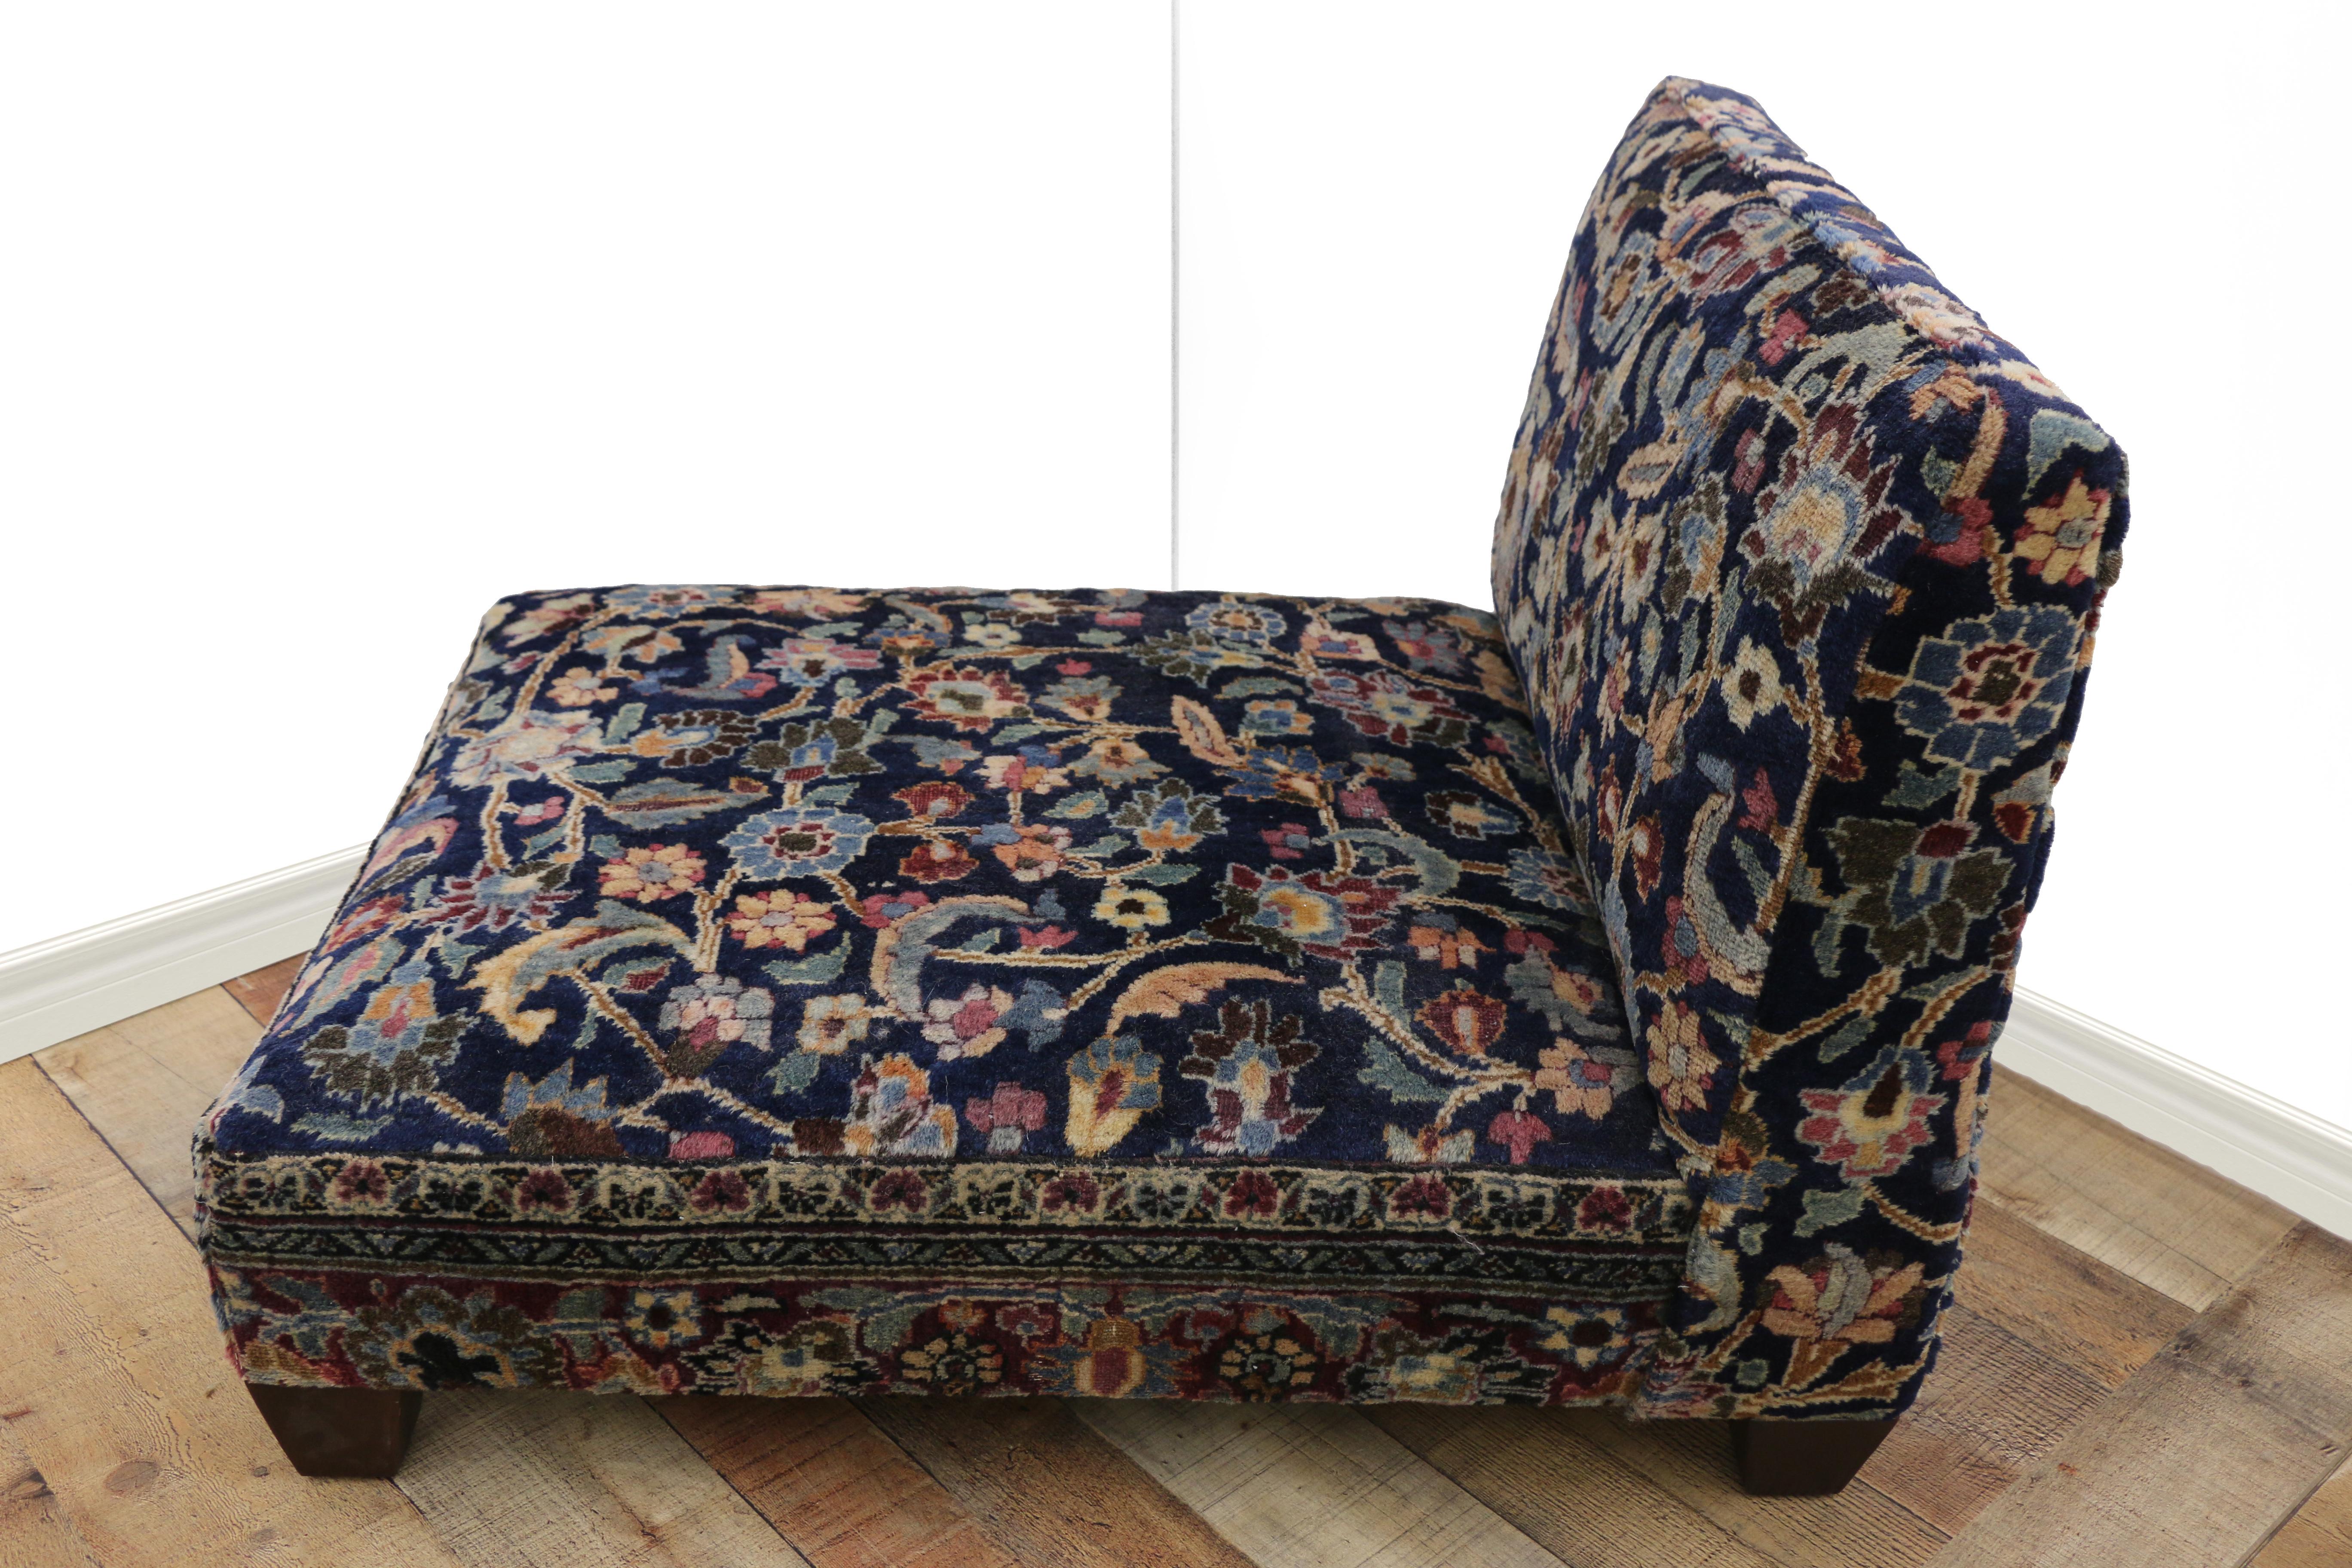 Wood Low Profile Slipper Chair or Persian Petbed from Antique Persian Khorassan Rug